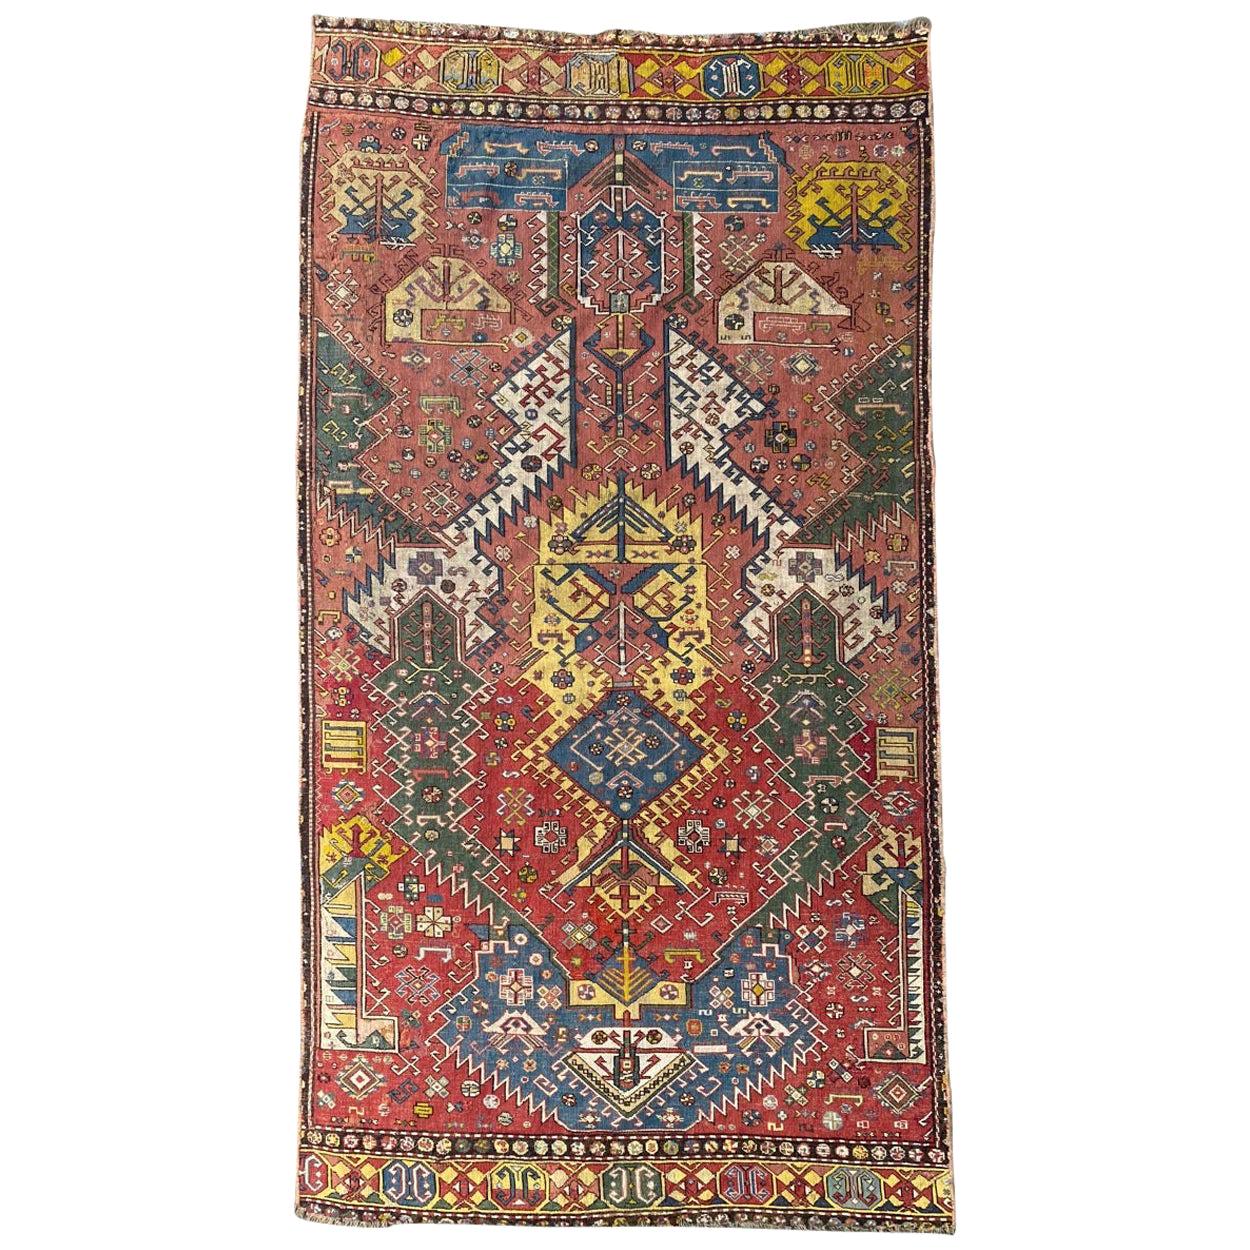 Bobyrug’s Extraordinary Unusual Antique Caucasian Needlepoint Embroidered Rug For Sale